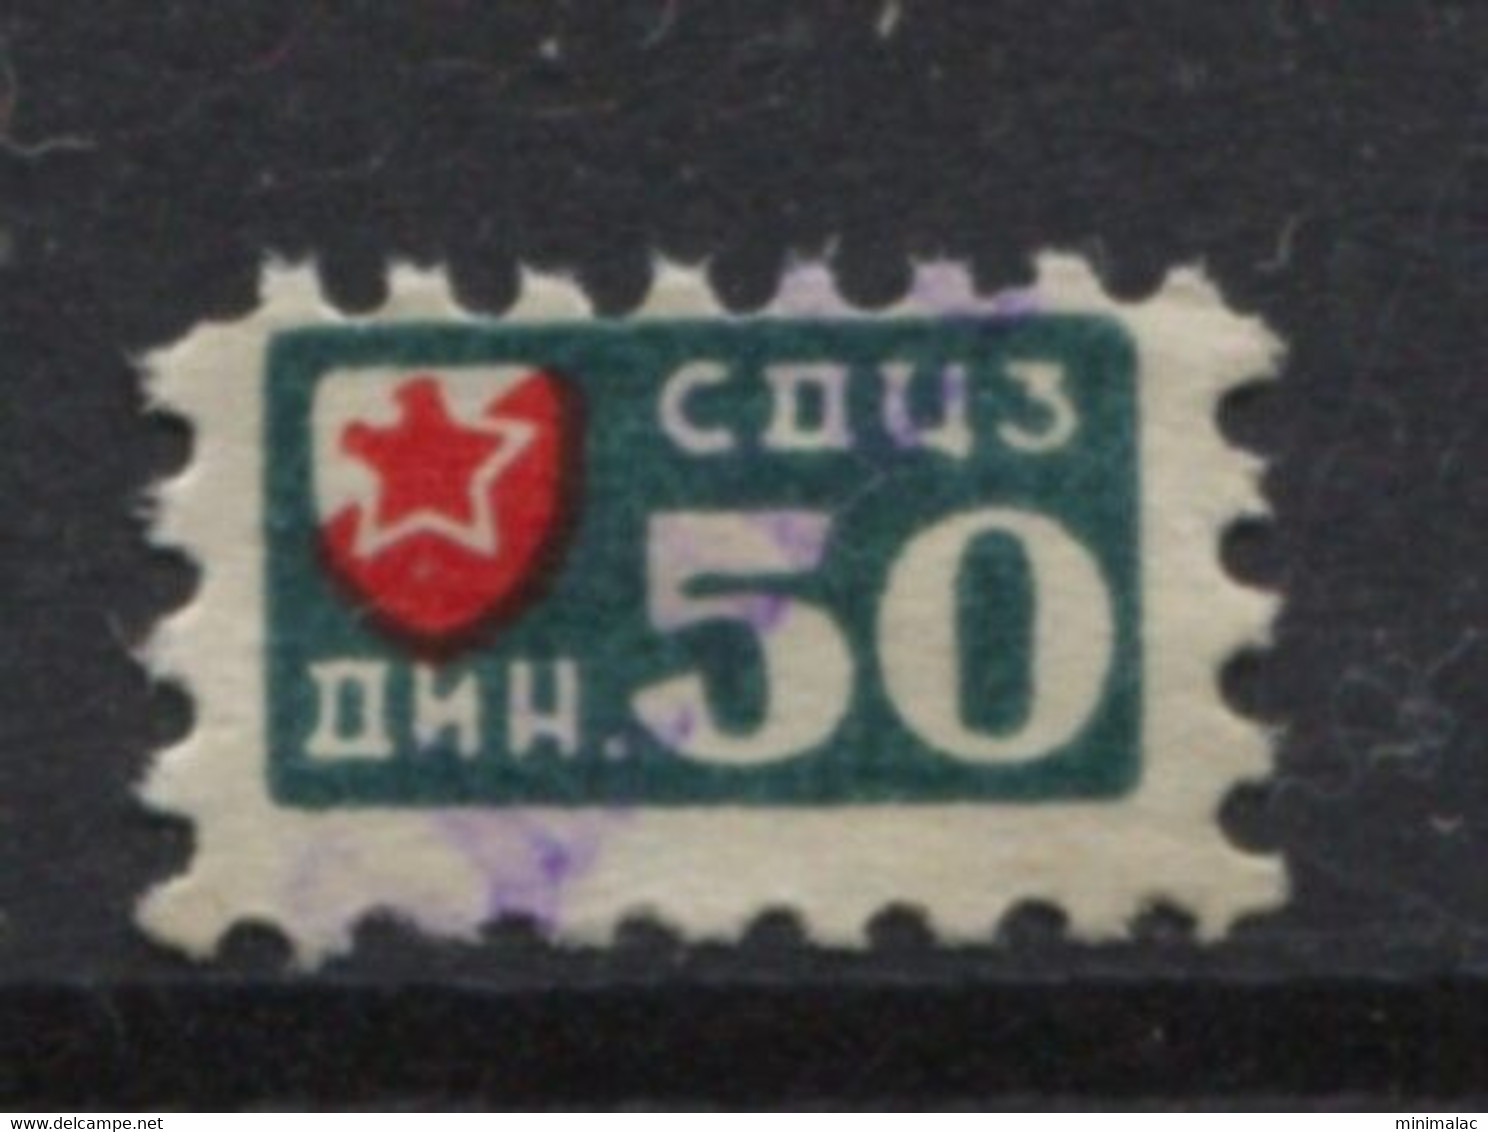 Yugoslavia 1962, Sports Society Red Star Beograd, Football, Stamp For Membership, Revenue, Tax Stamp 50 - Officials